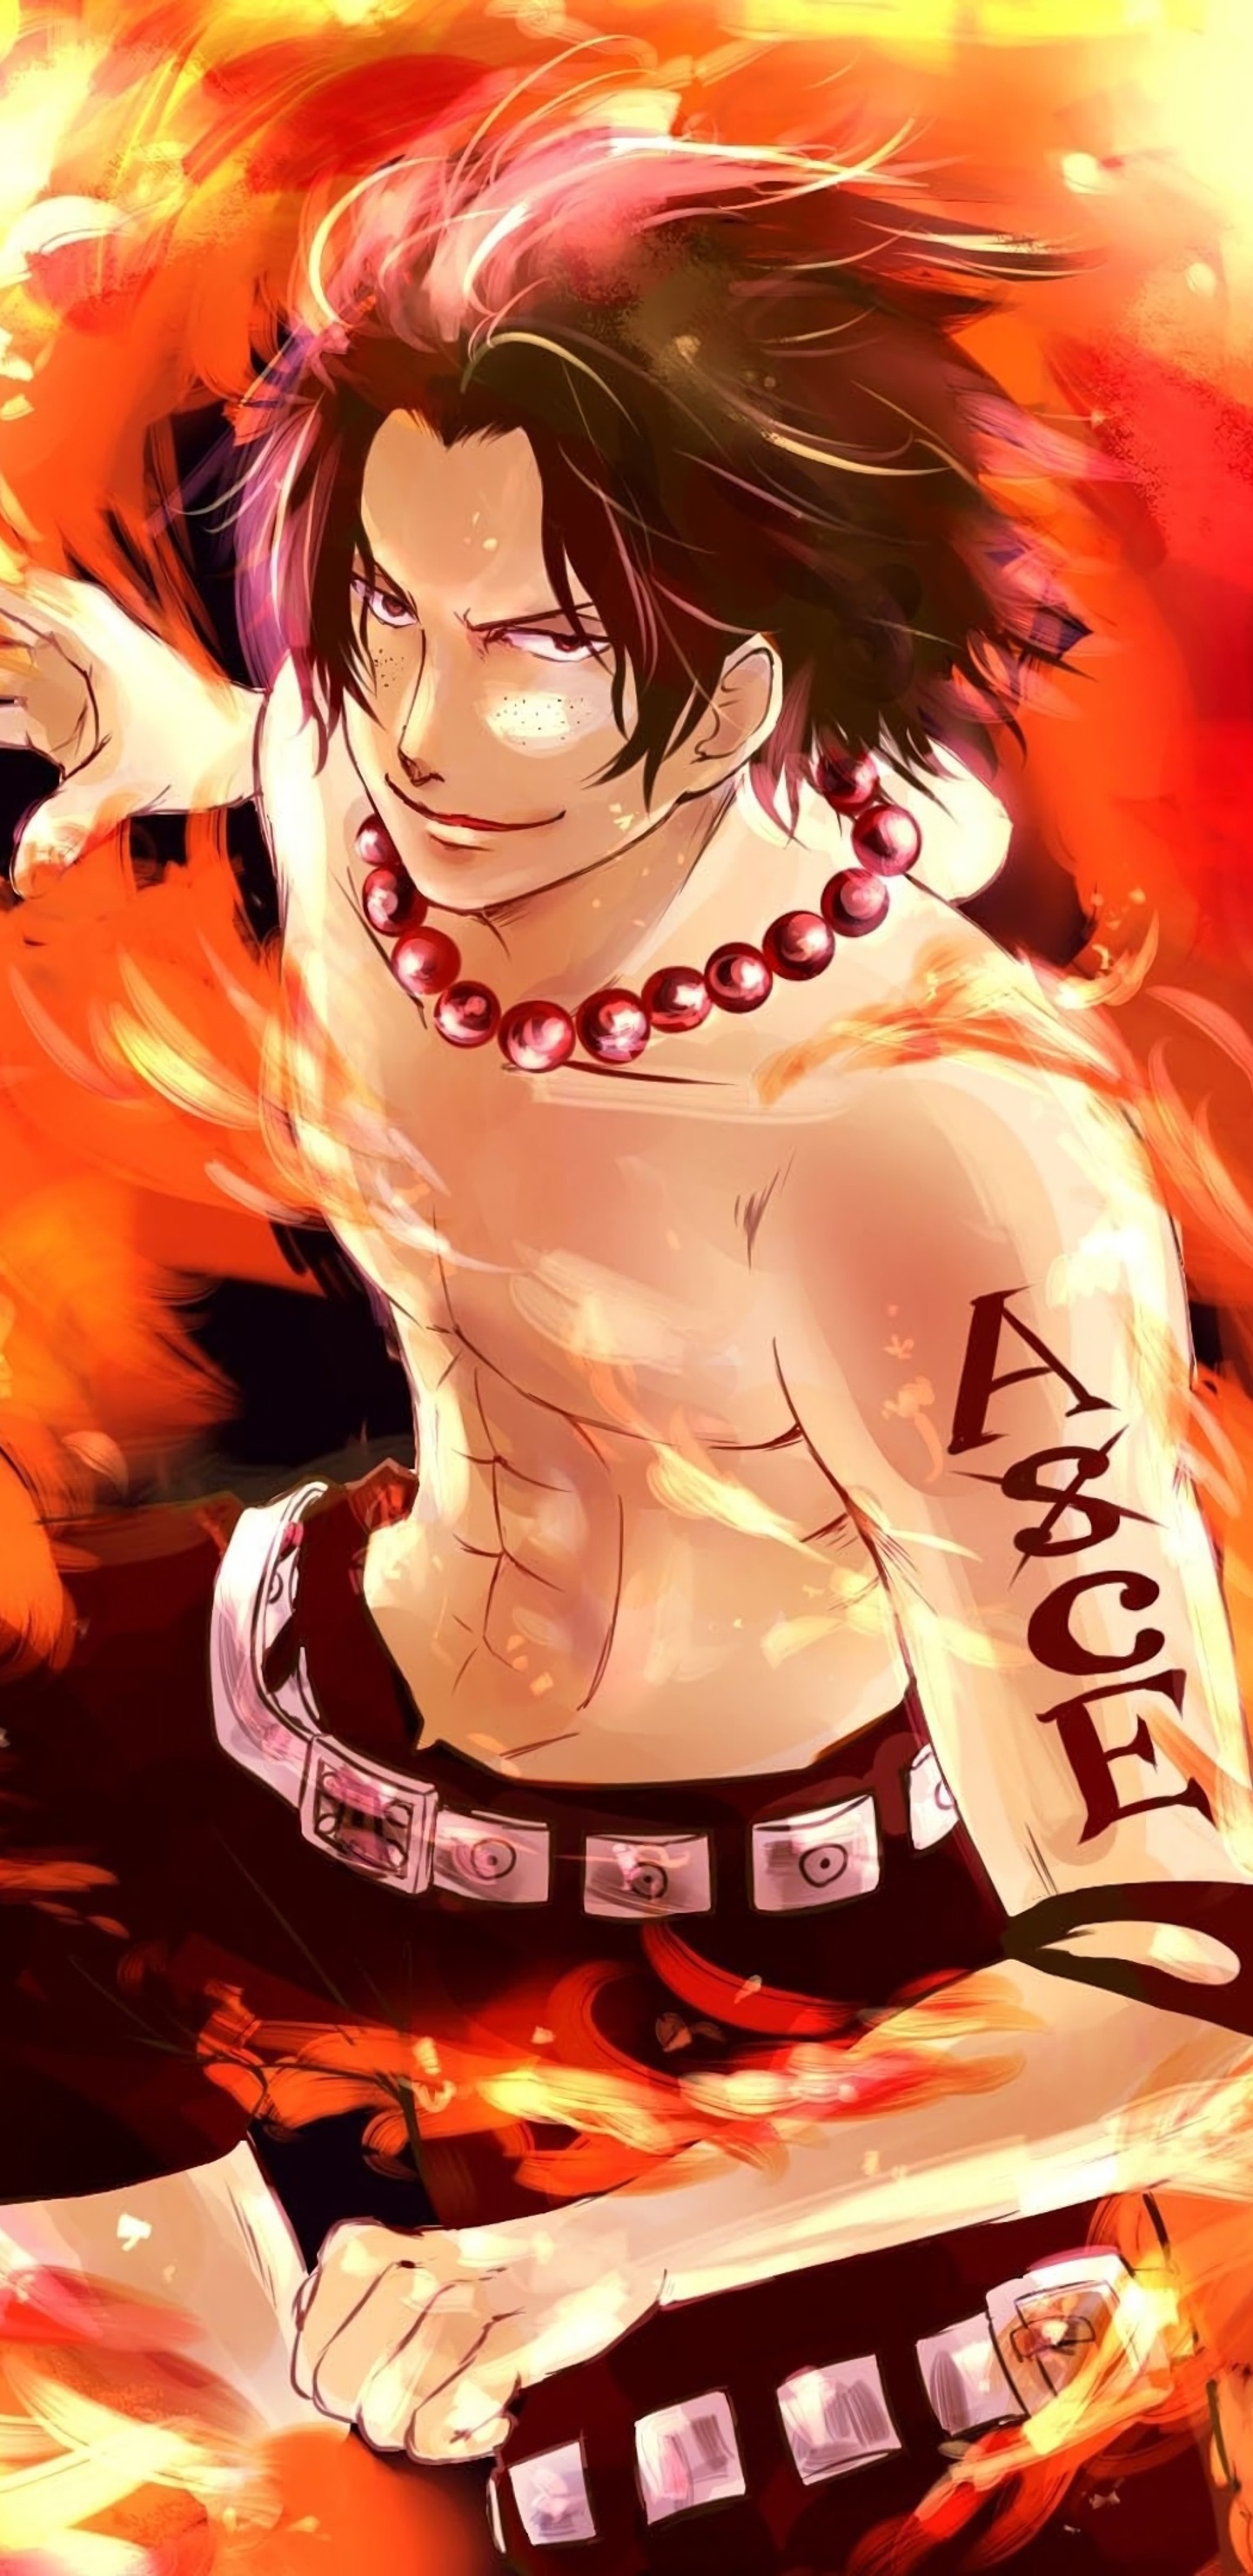 1440x2960 One Piece Portgas D Ace Samsung Galaxy Note 9,8 ...